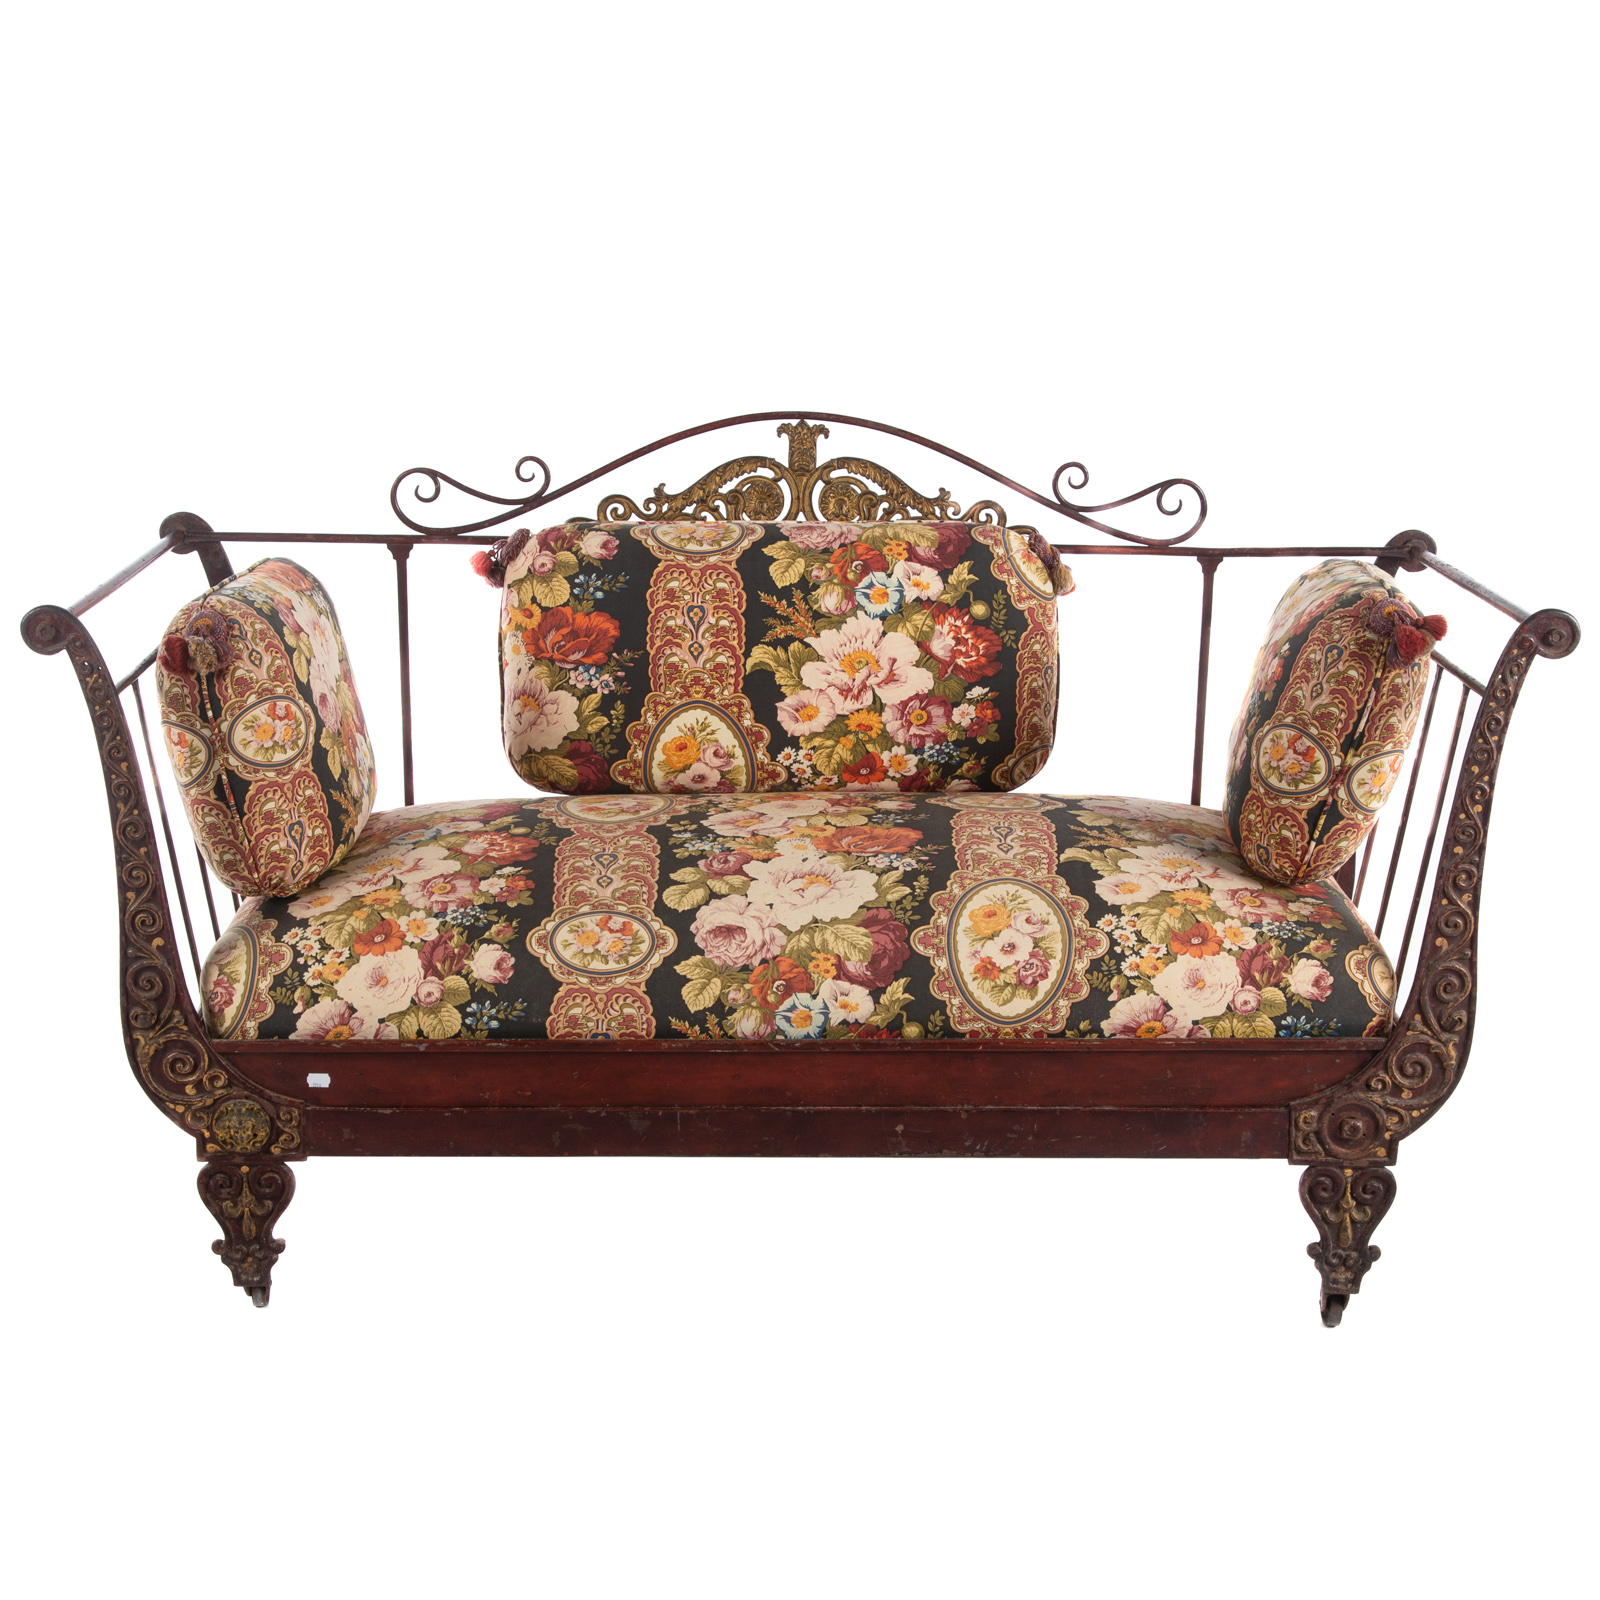 CLASSICAL STYLE CAST IRON SETTEE